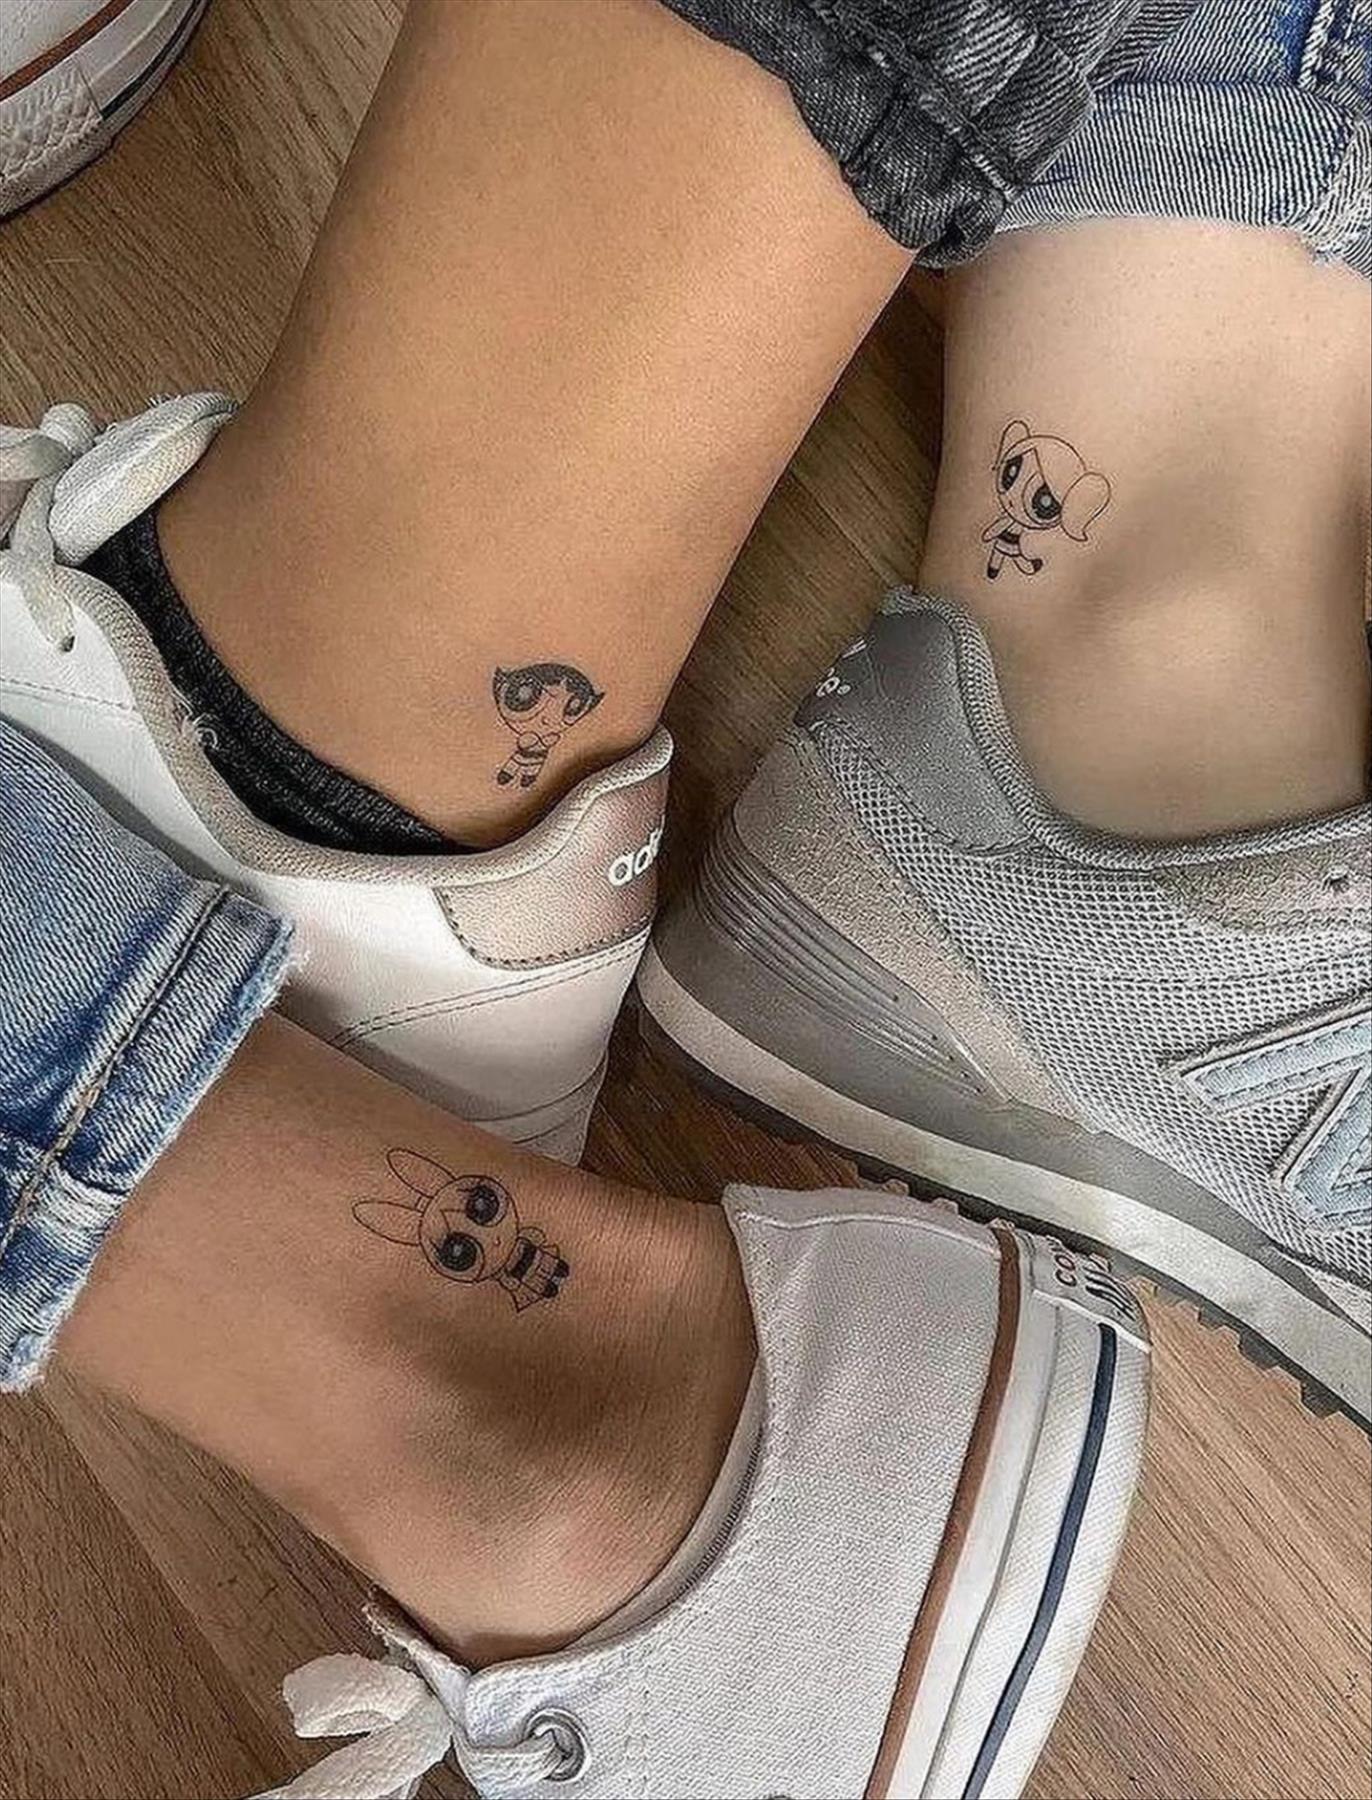 Unique small tattoos for women to wear in 2023